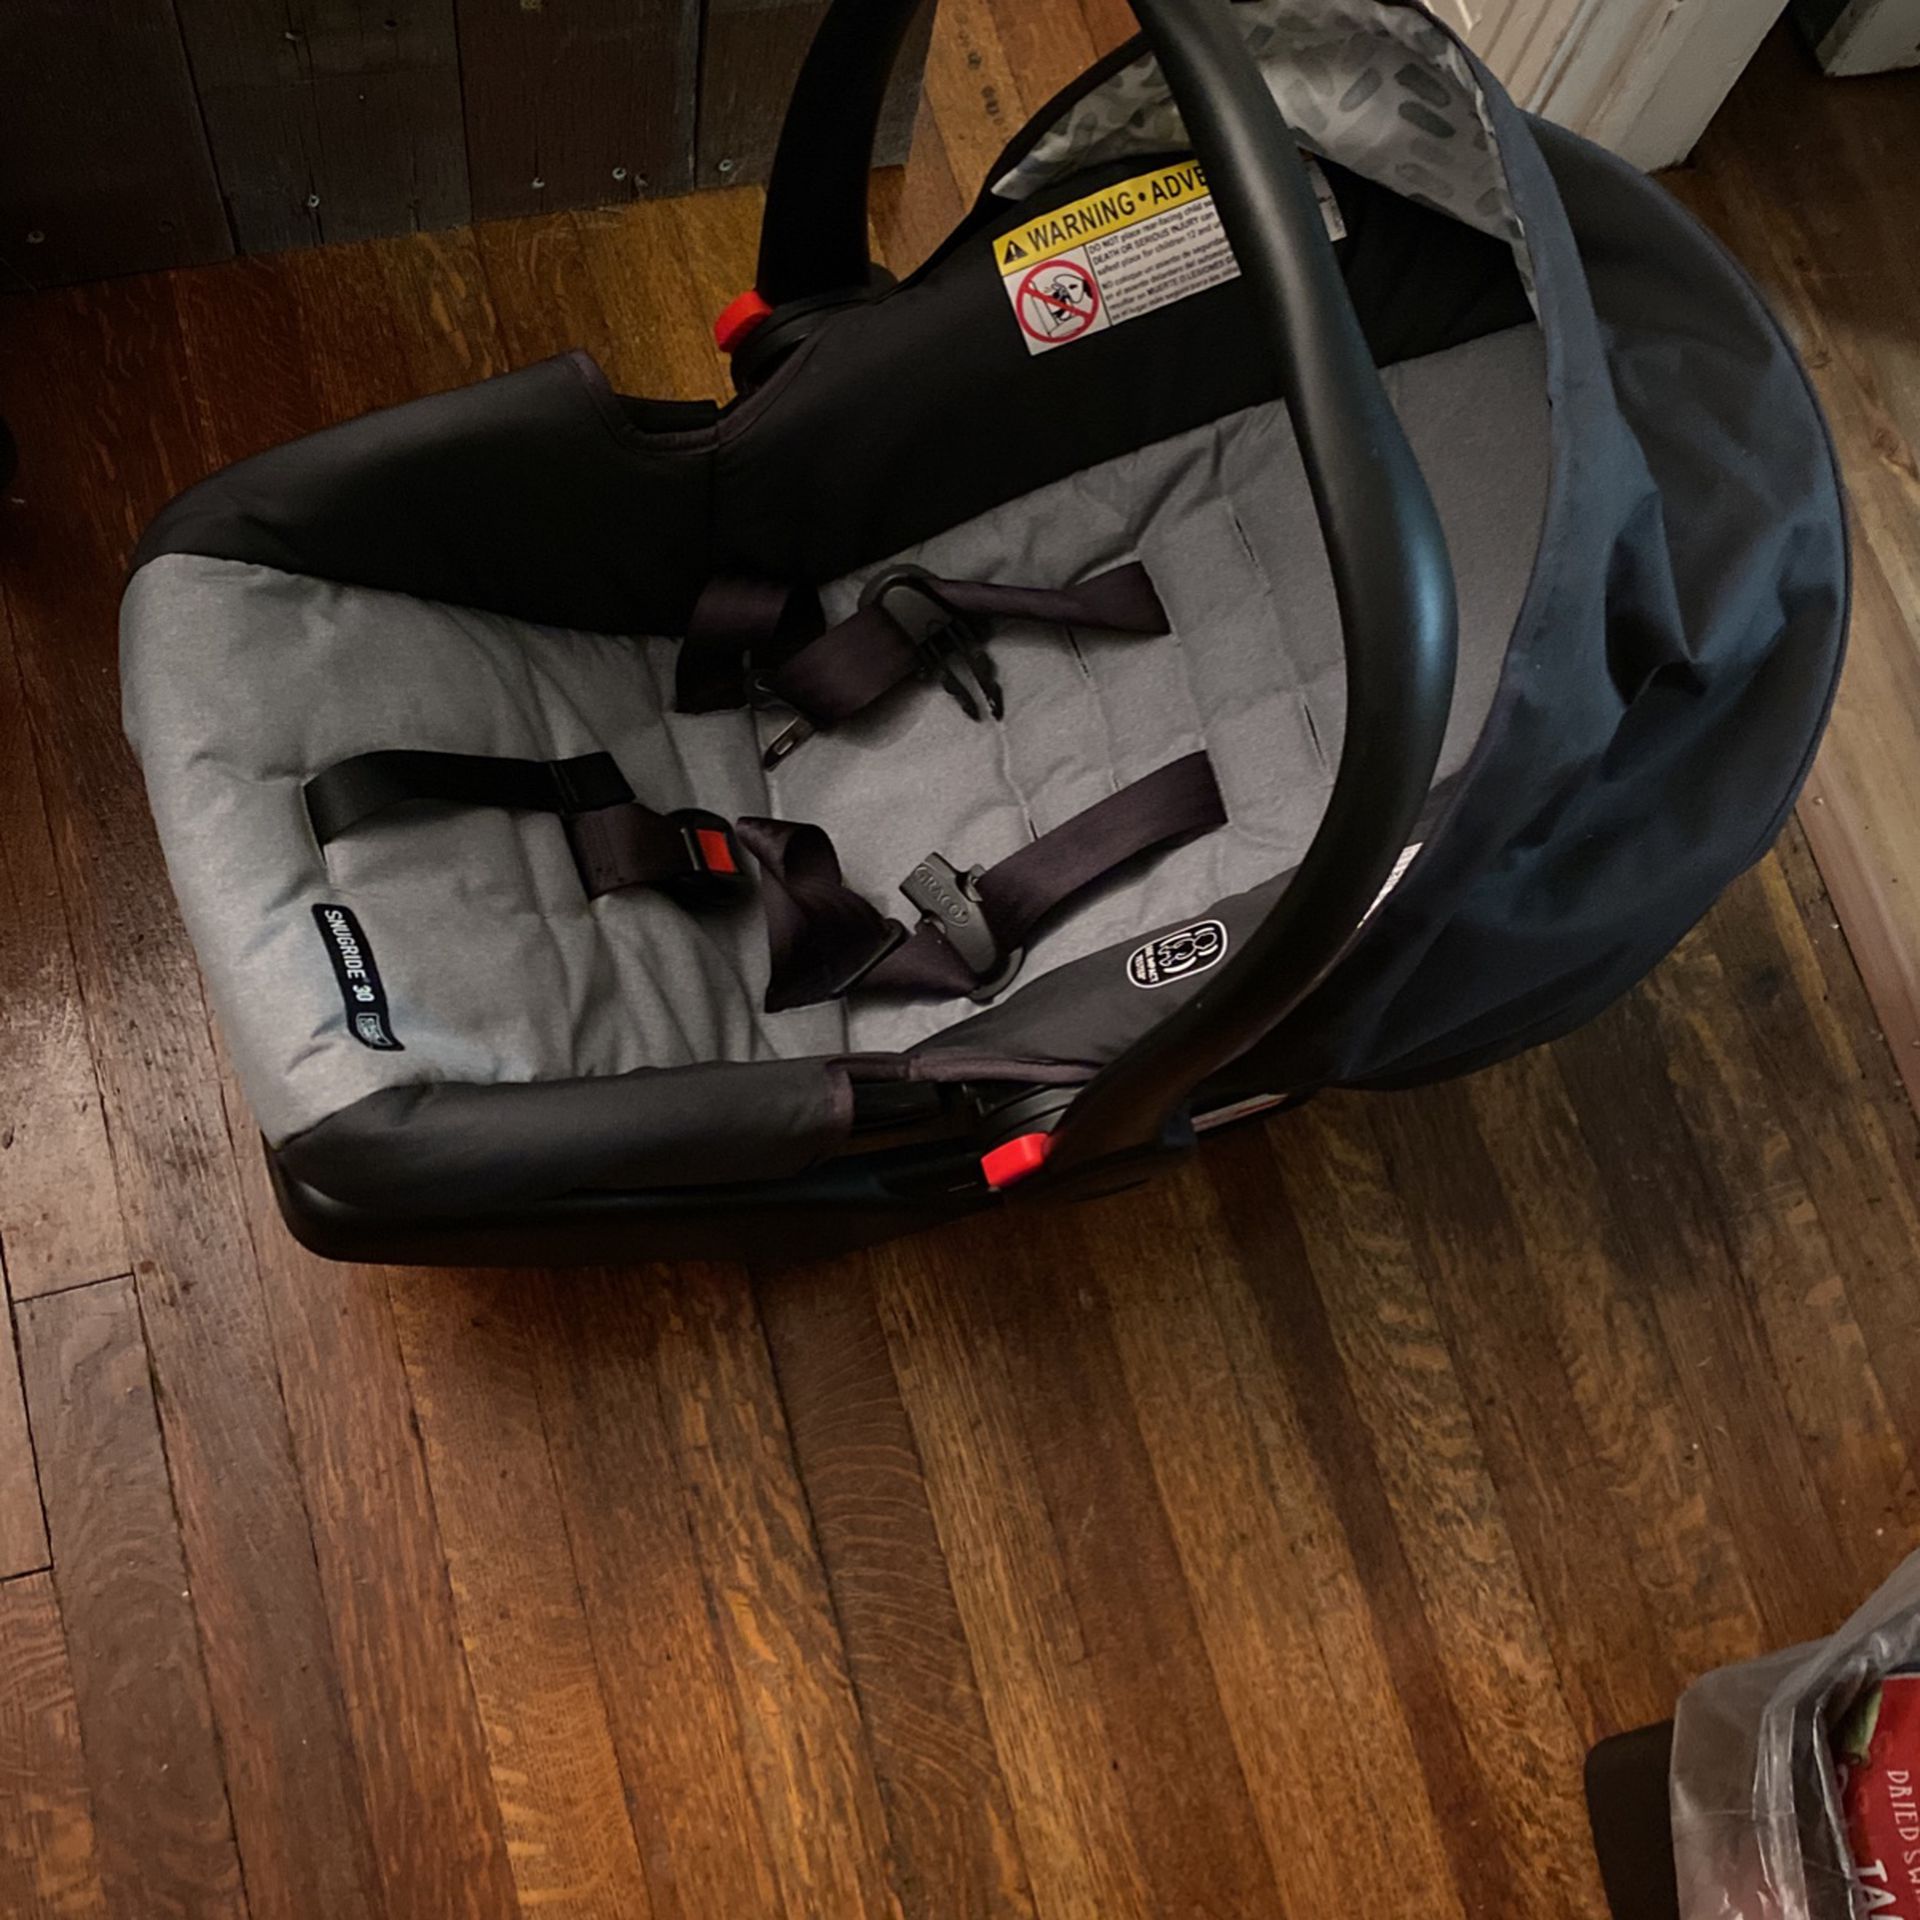 Graco Car Seat And Stroller 